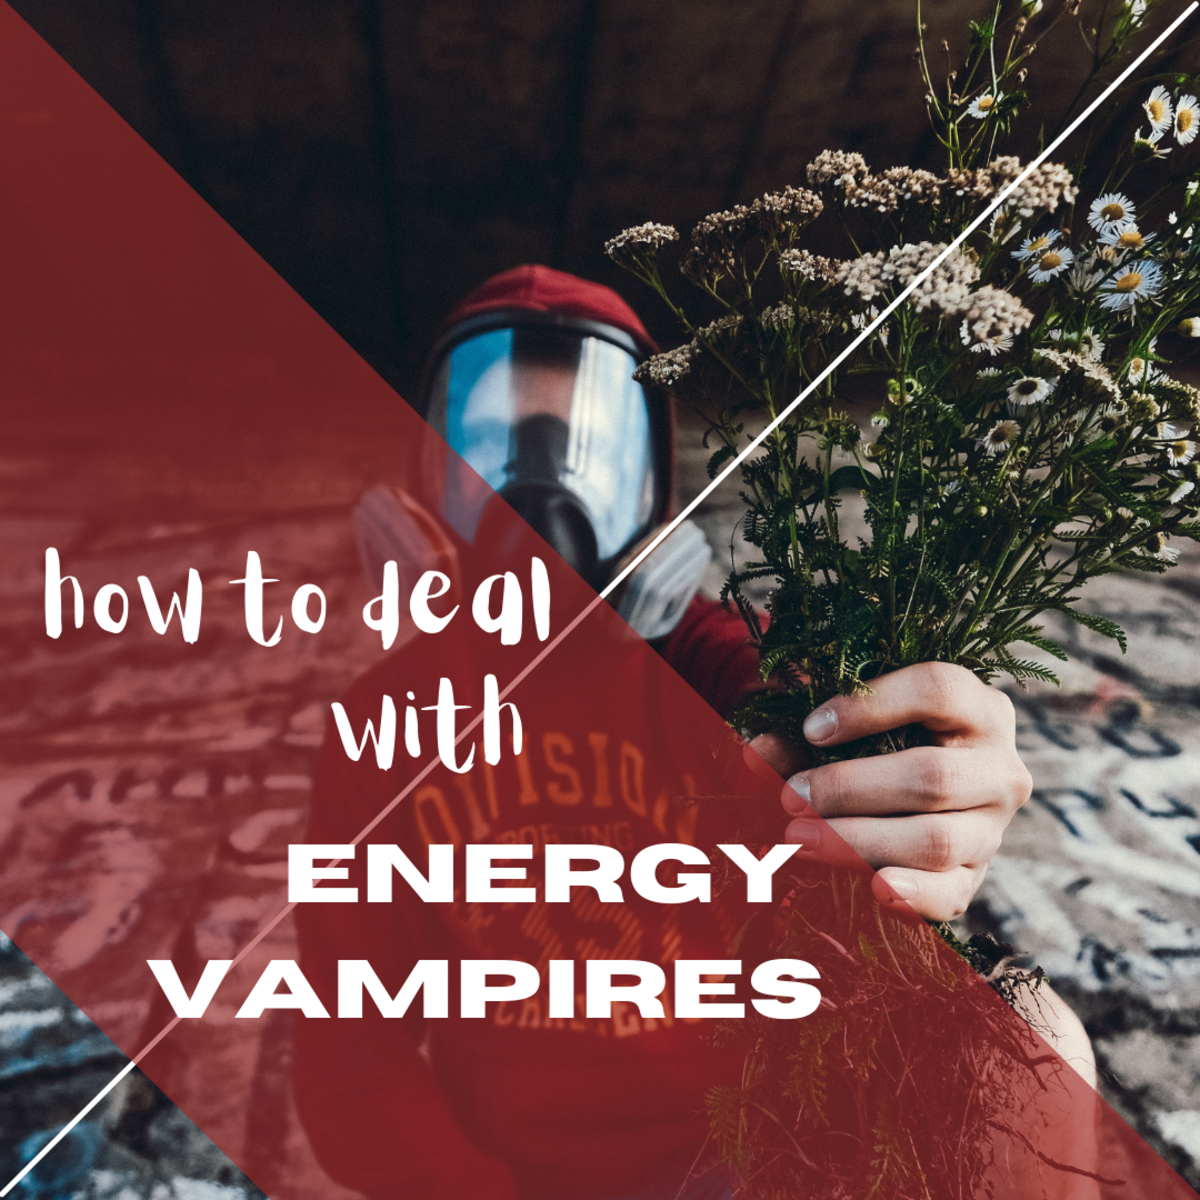 How do you deal with energy vampires?